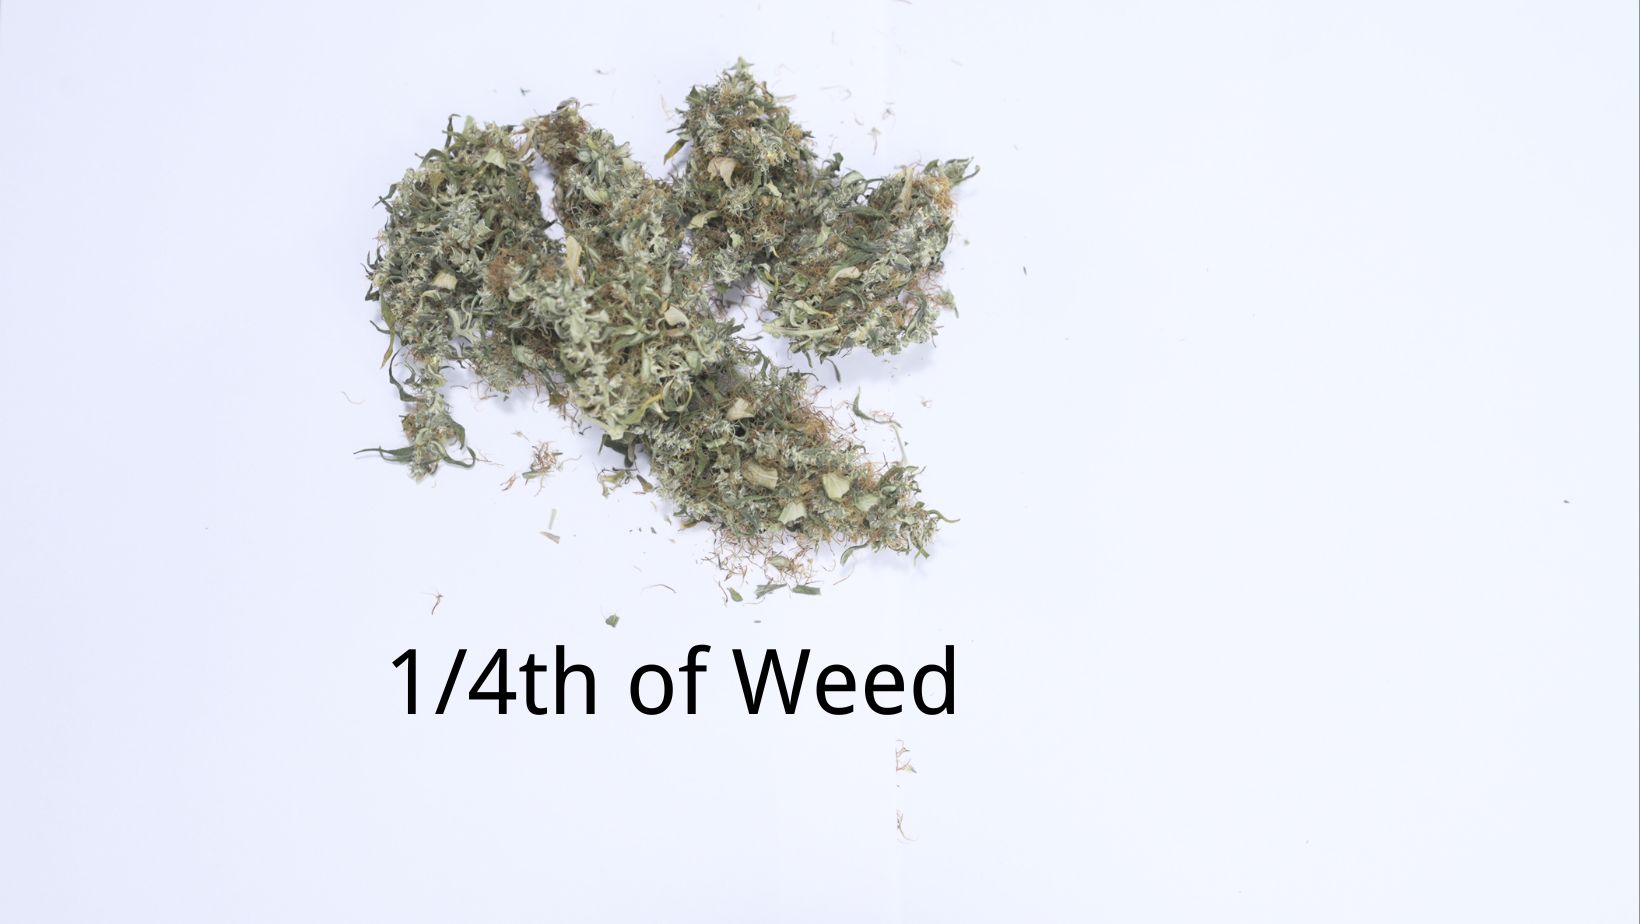 1/4th of weed